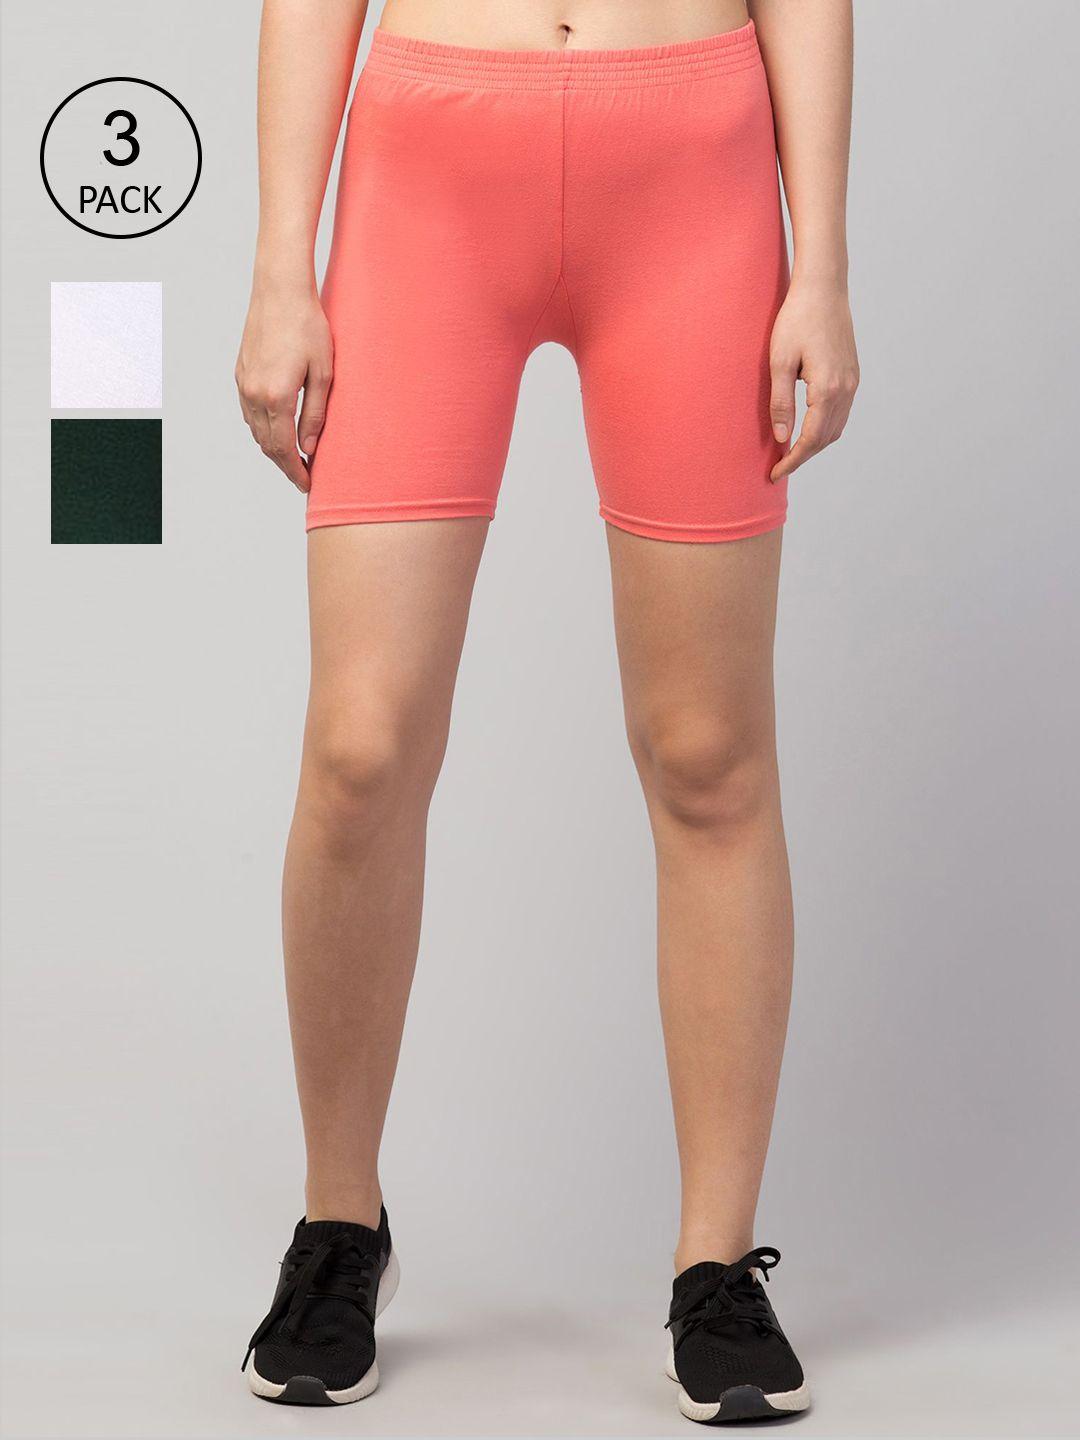 apraa-&-parma-women-pink-ombre-slim-fit-cycling-sports-shorts